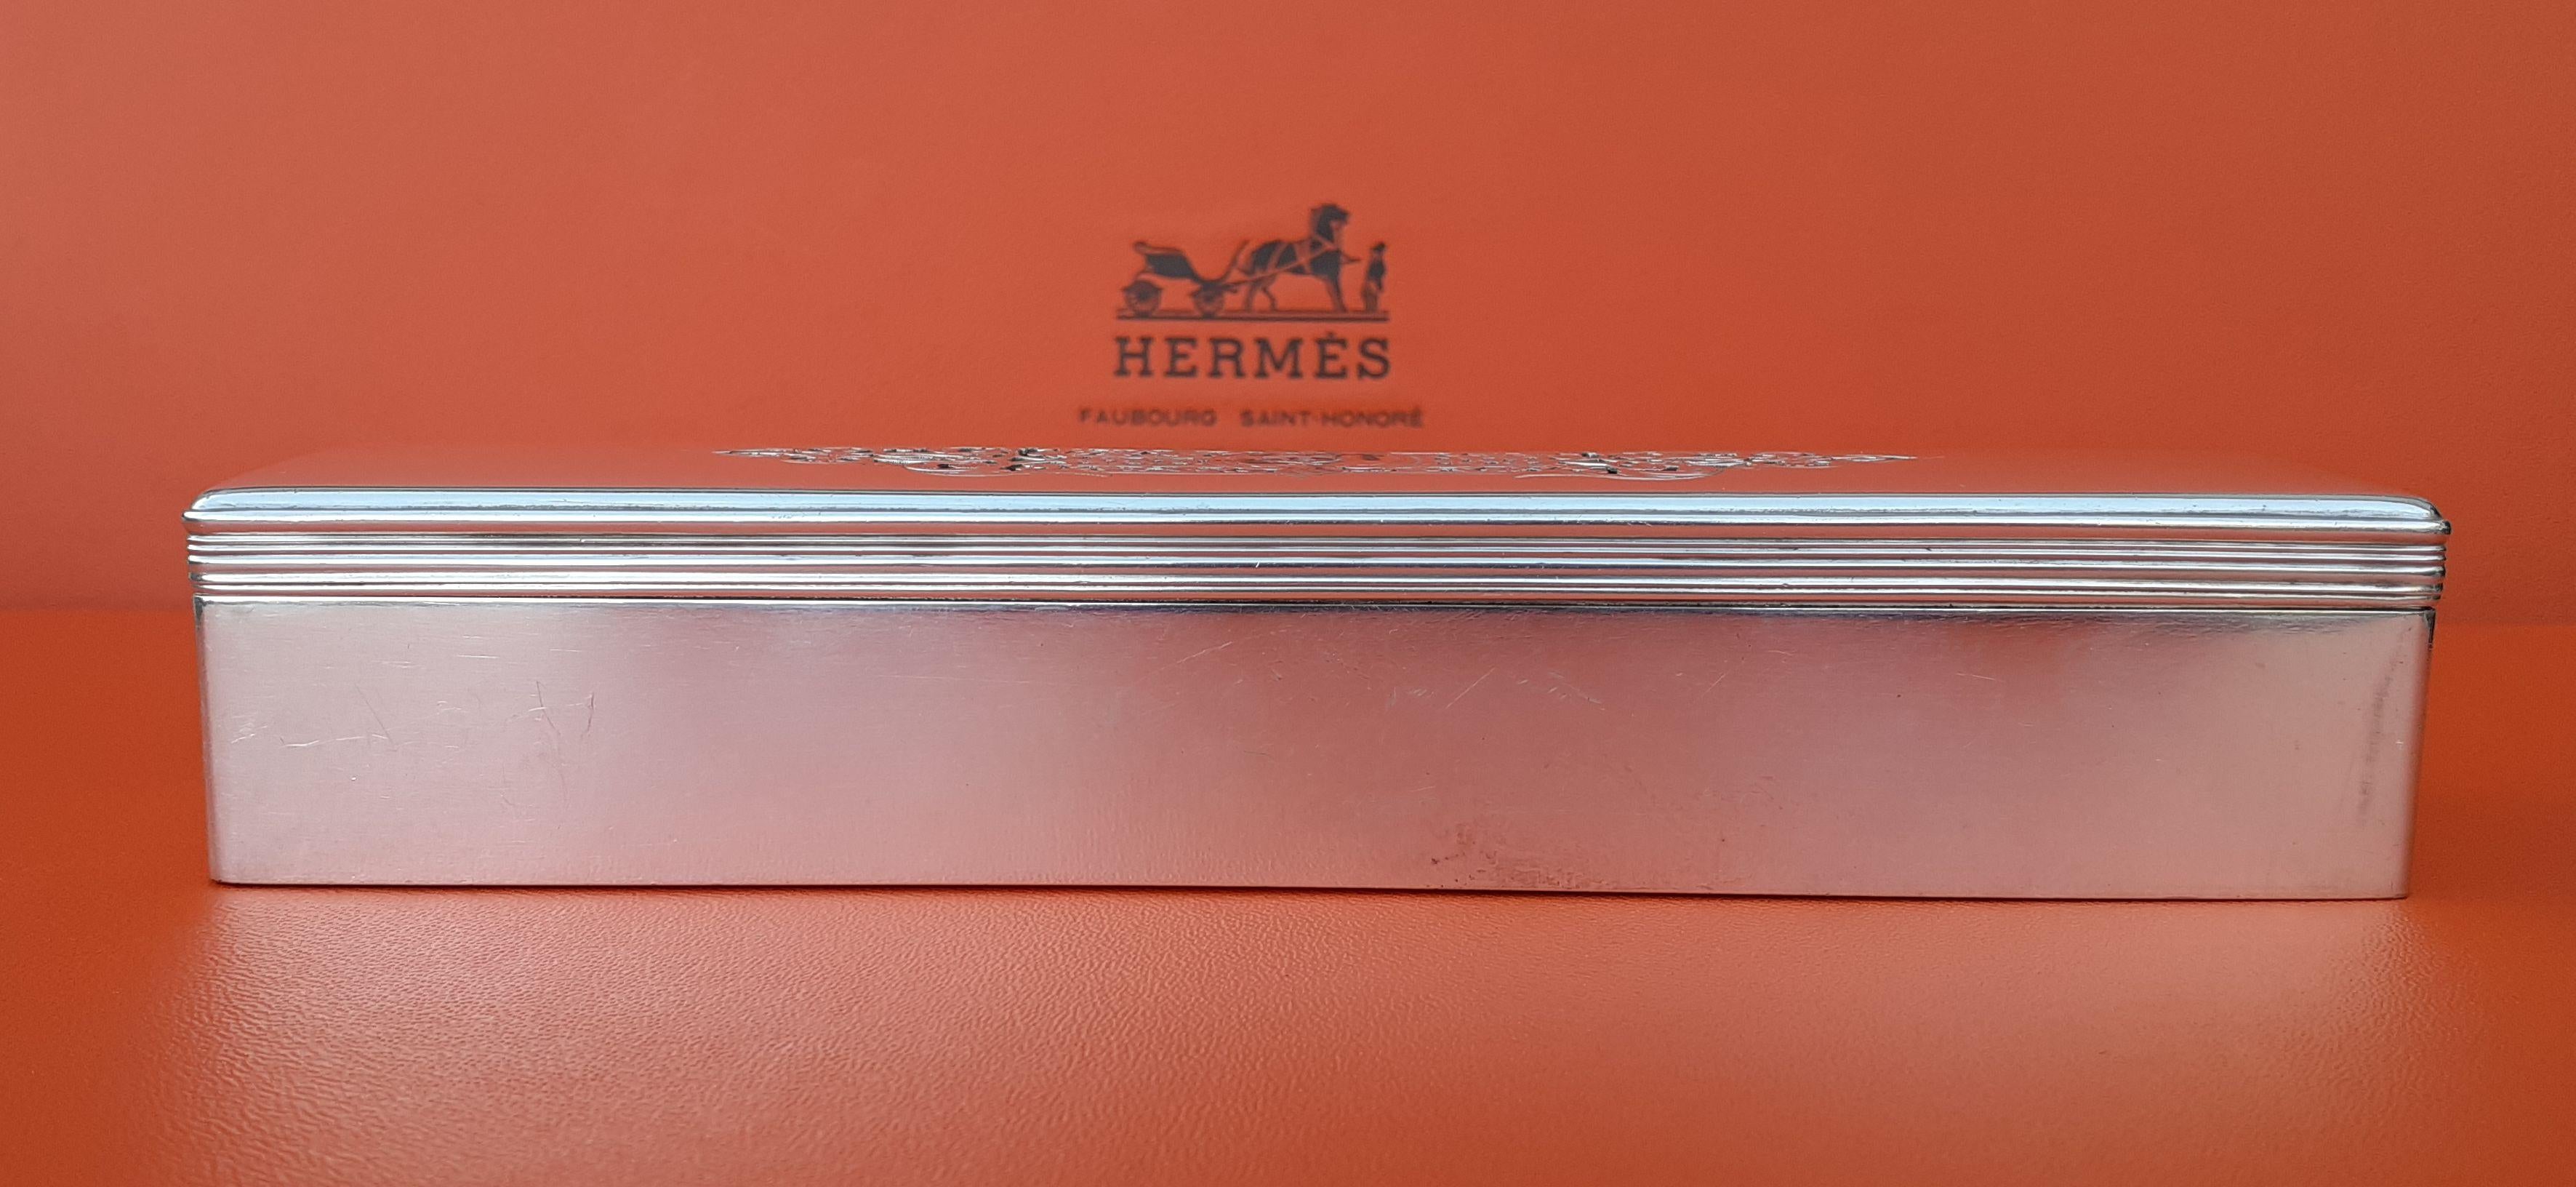 Exceptional Hermès Openwork Chiselled Silver Box Case RARE For Sale 3